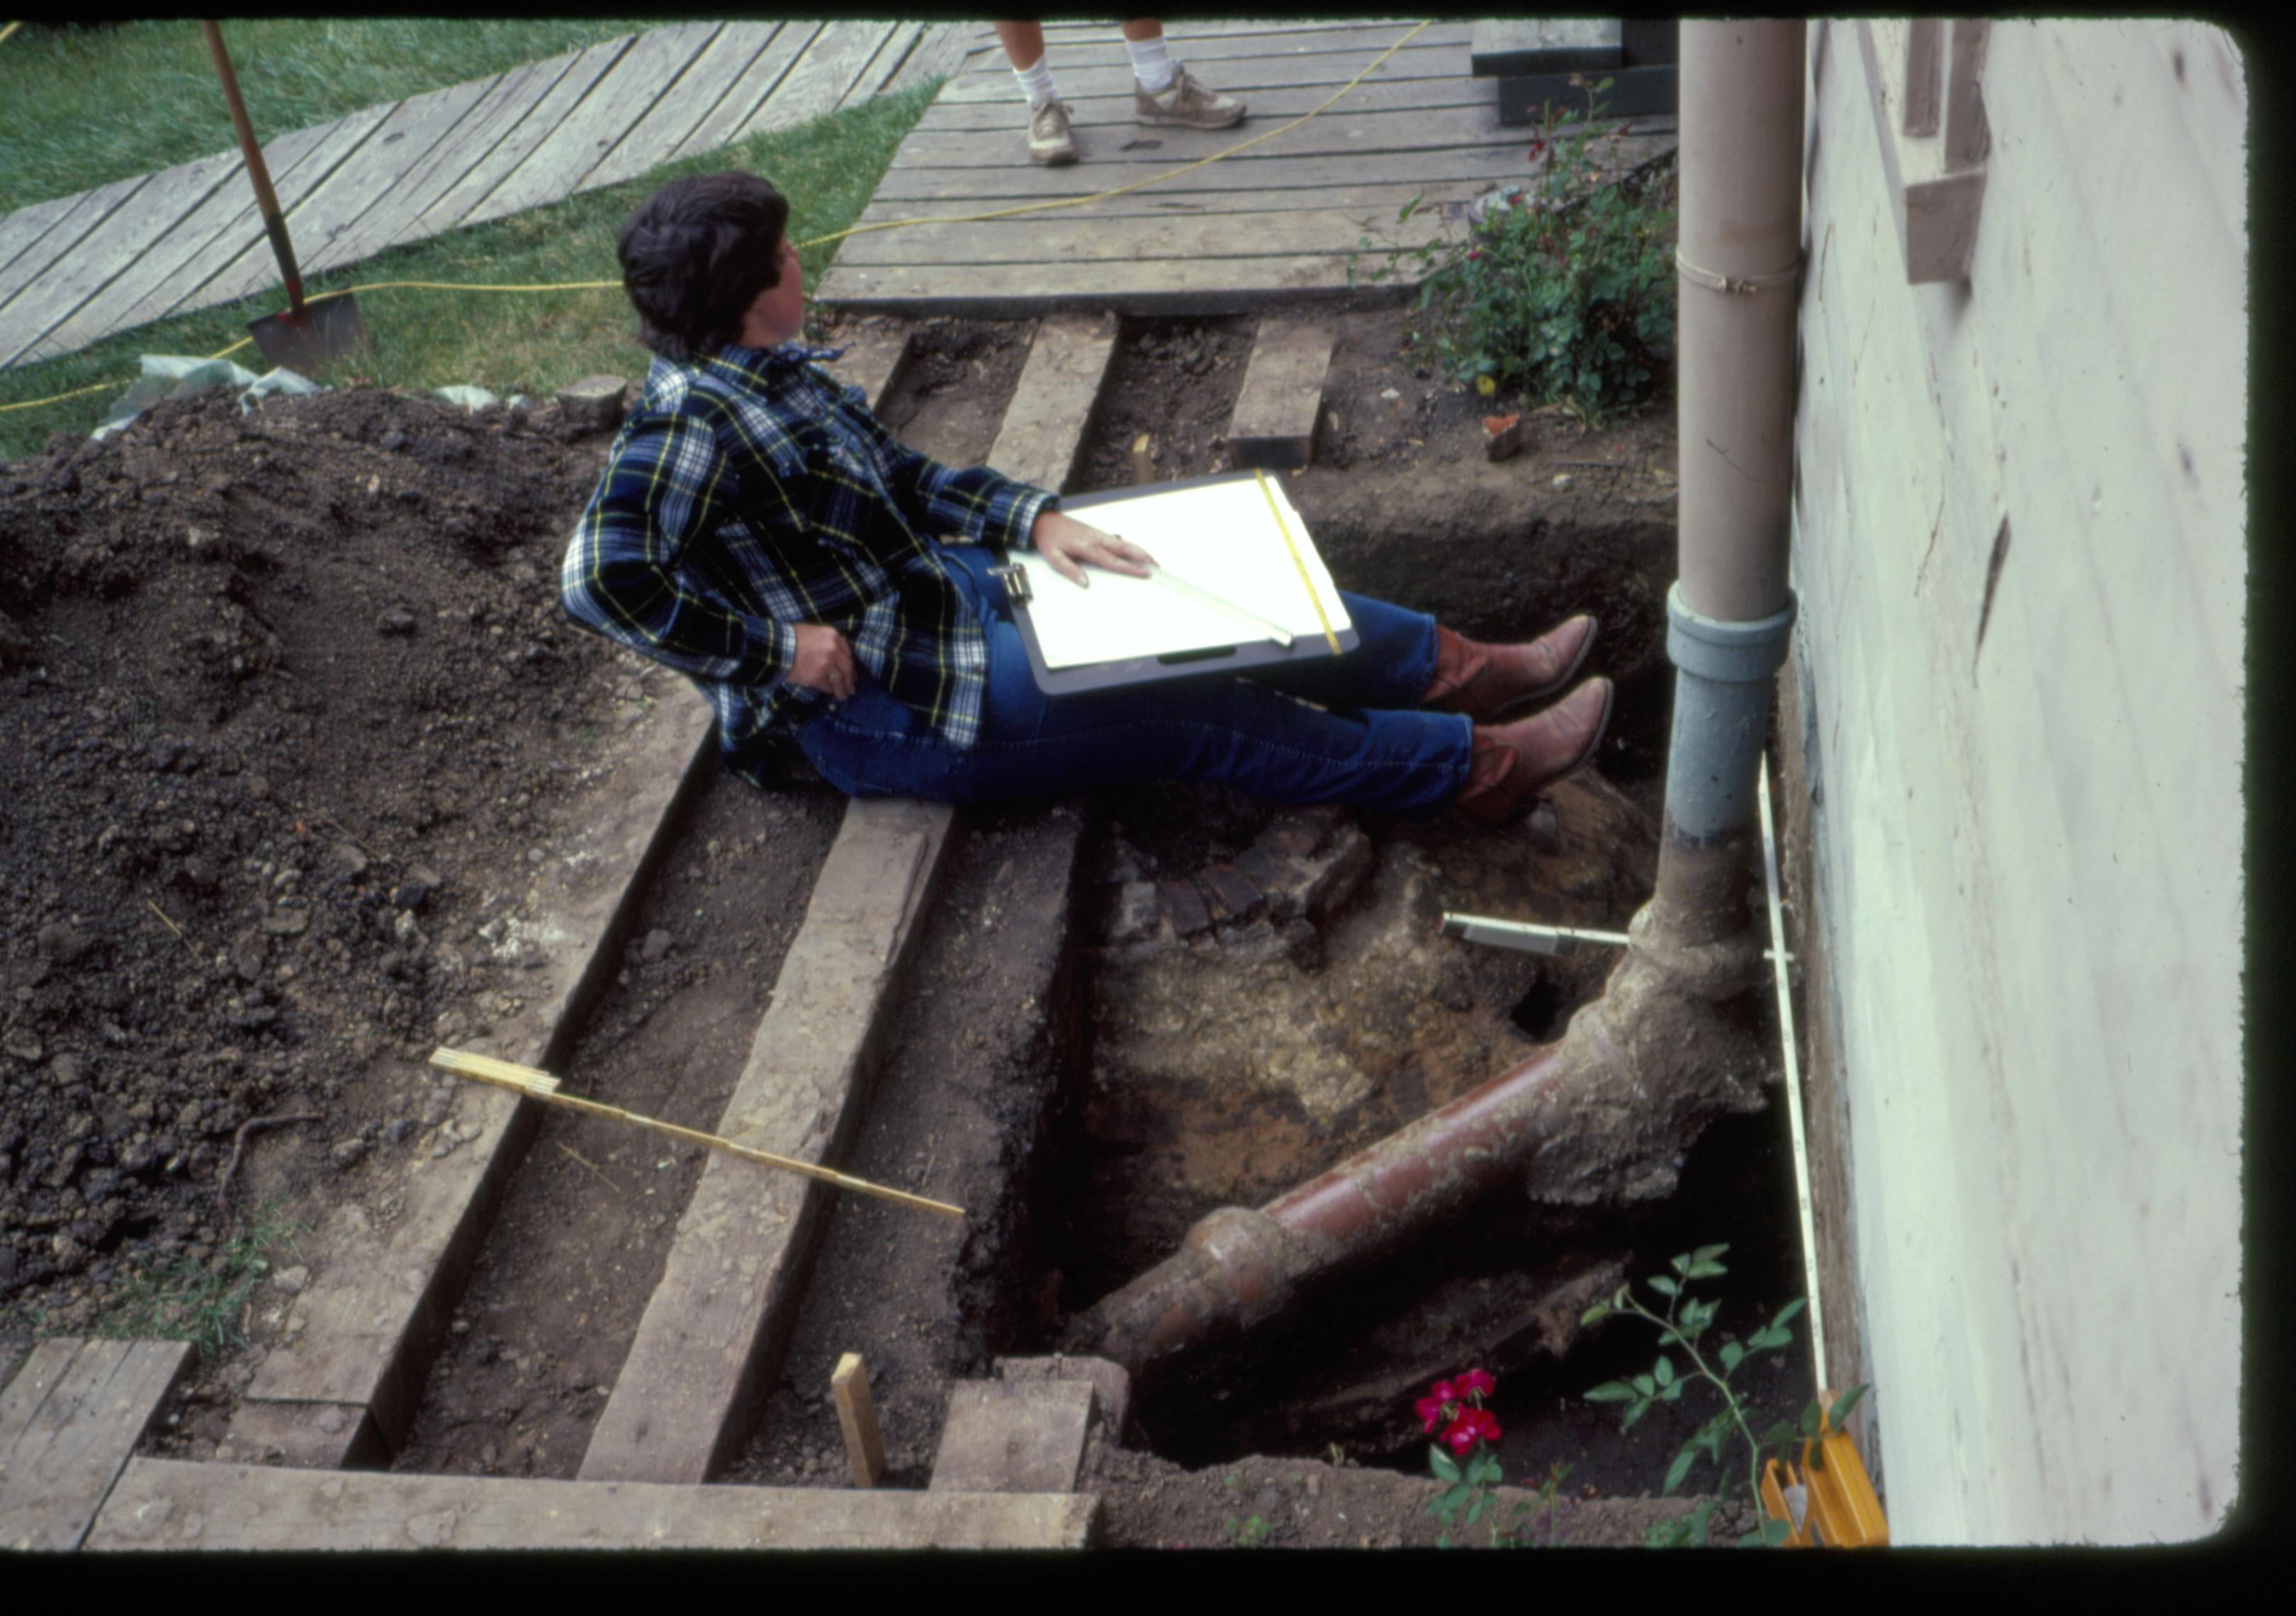 Cistern and water supply/roof drain of the Lincoln Home, in the back yard. Archeologist sits on boardwalk rails, speaking to a second person. Photographer facing south.